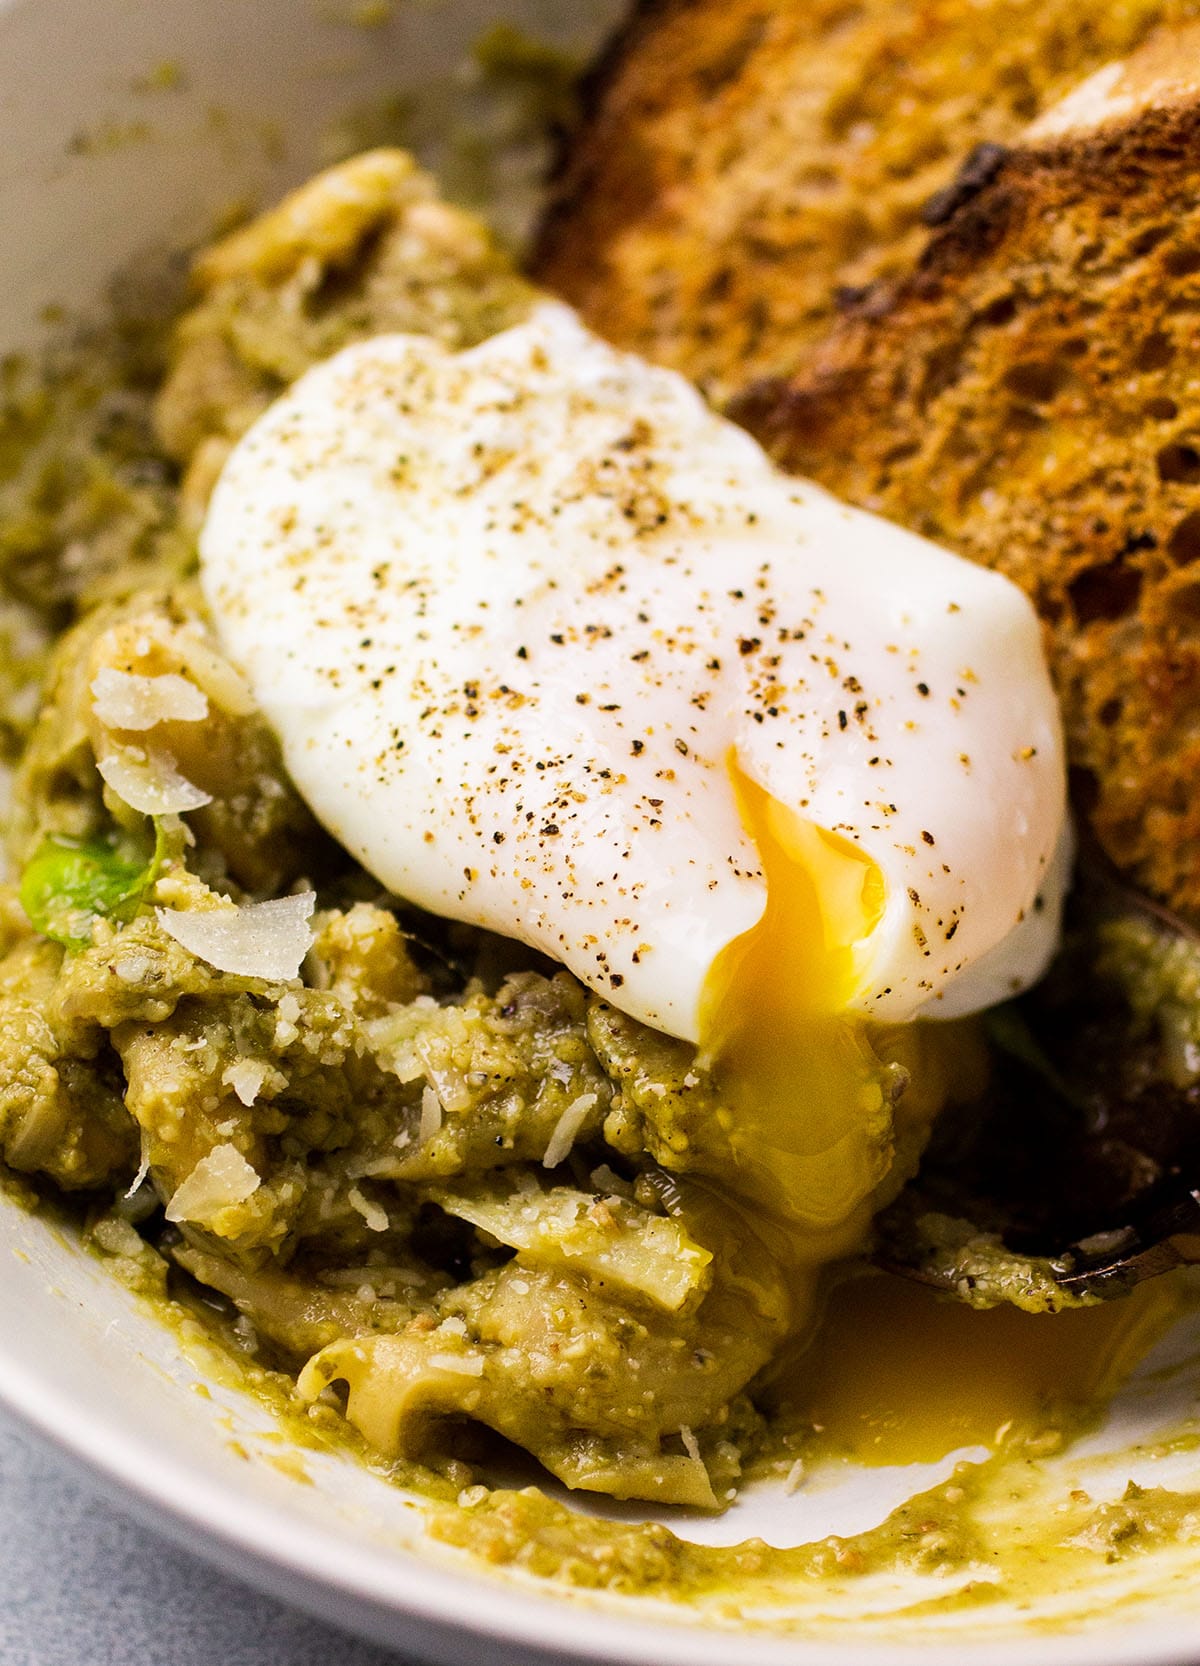 Poached egg on top of pesto butter beans.